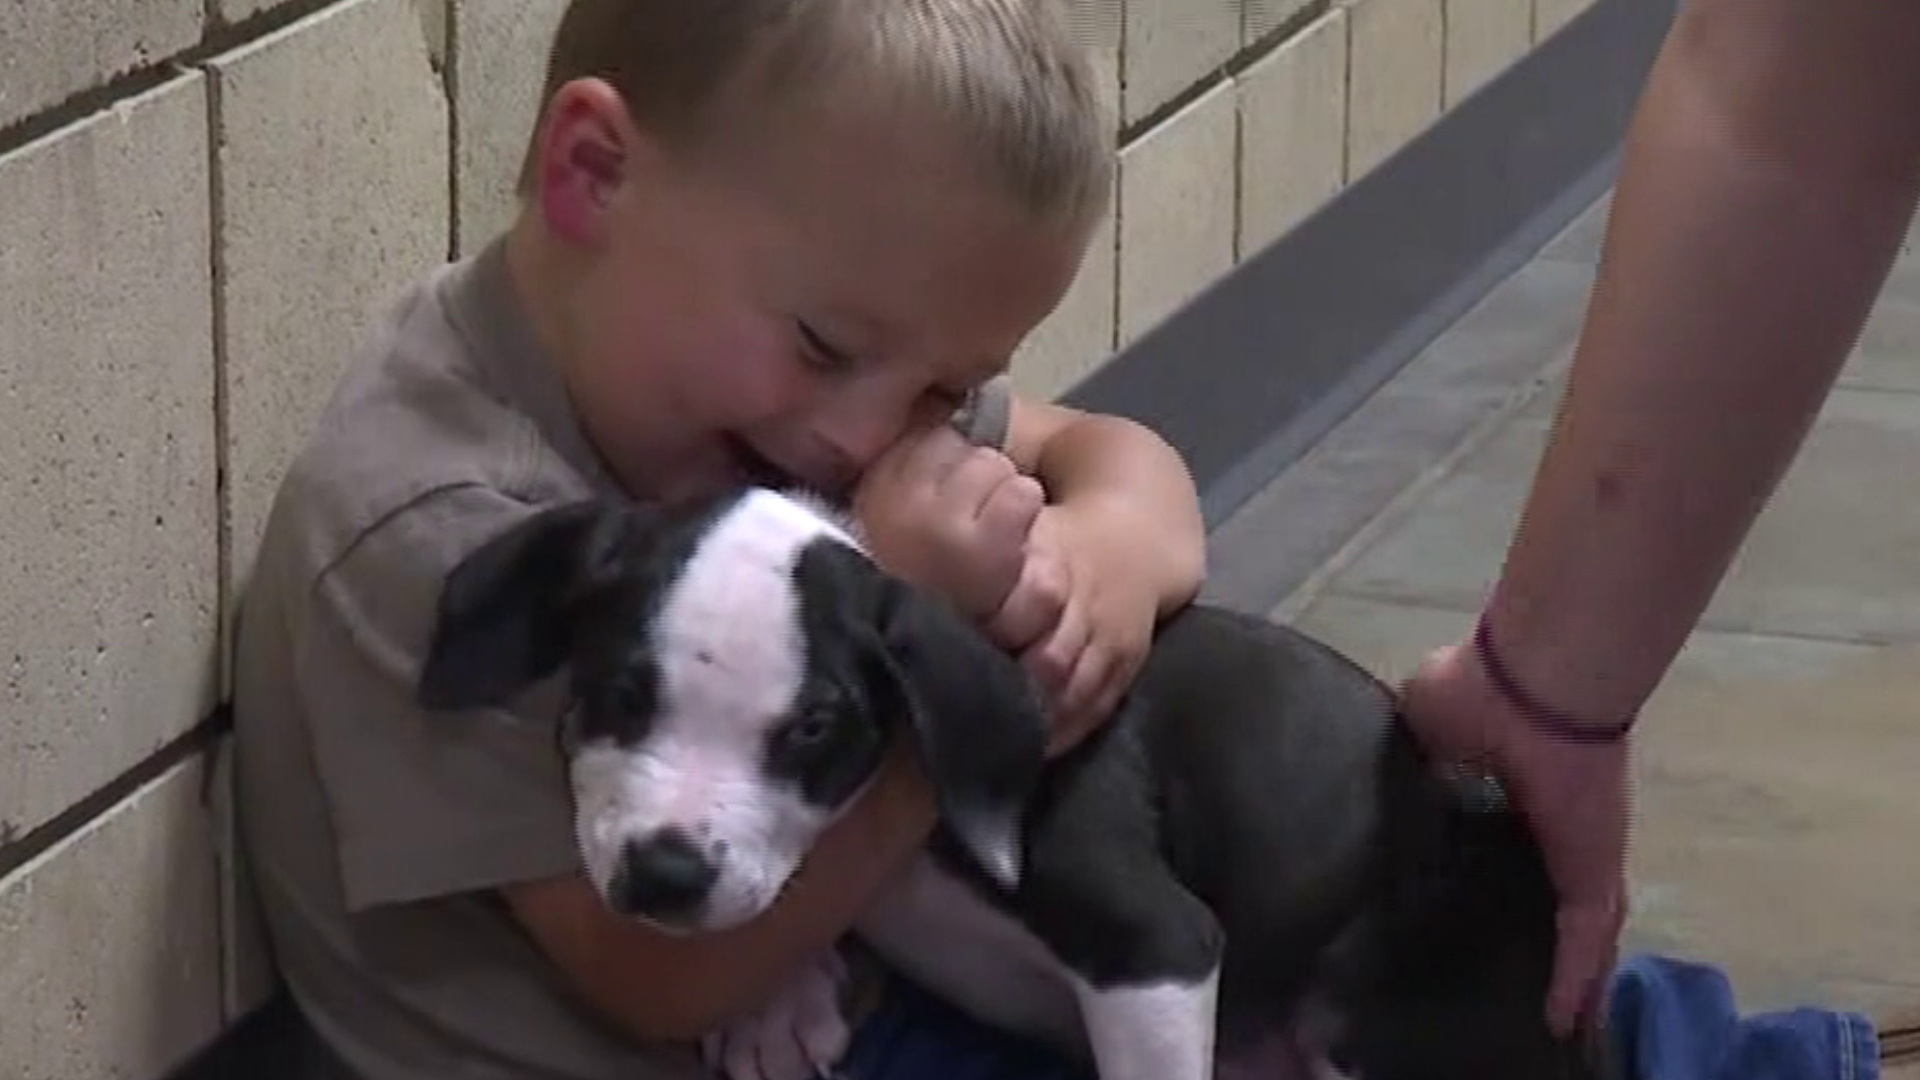 A puppy with a cleft palate has found a forever home and a best friend in a 2-year-old sharing the same birth defect.